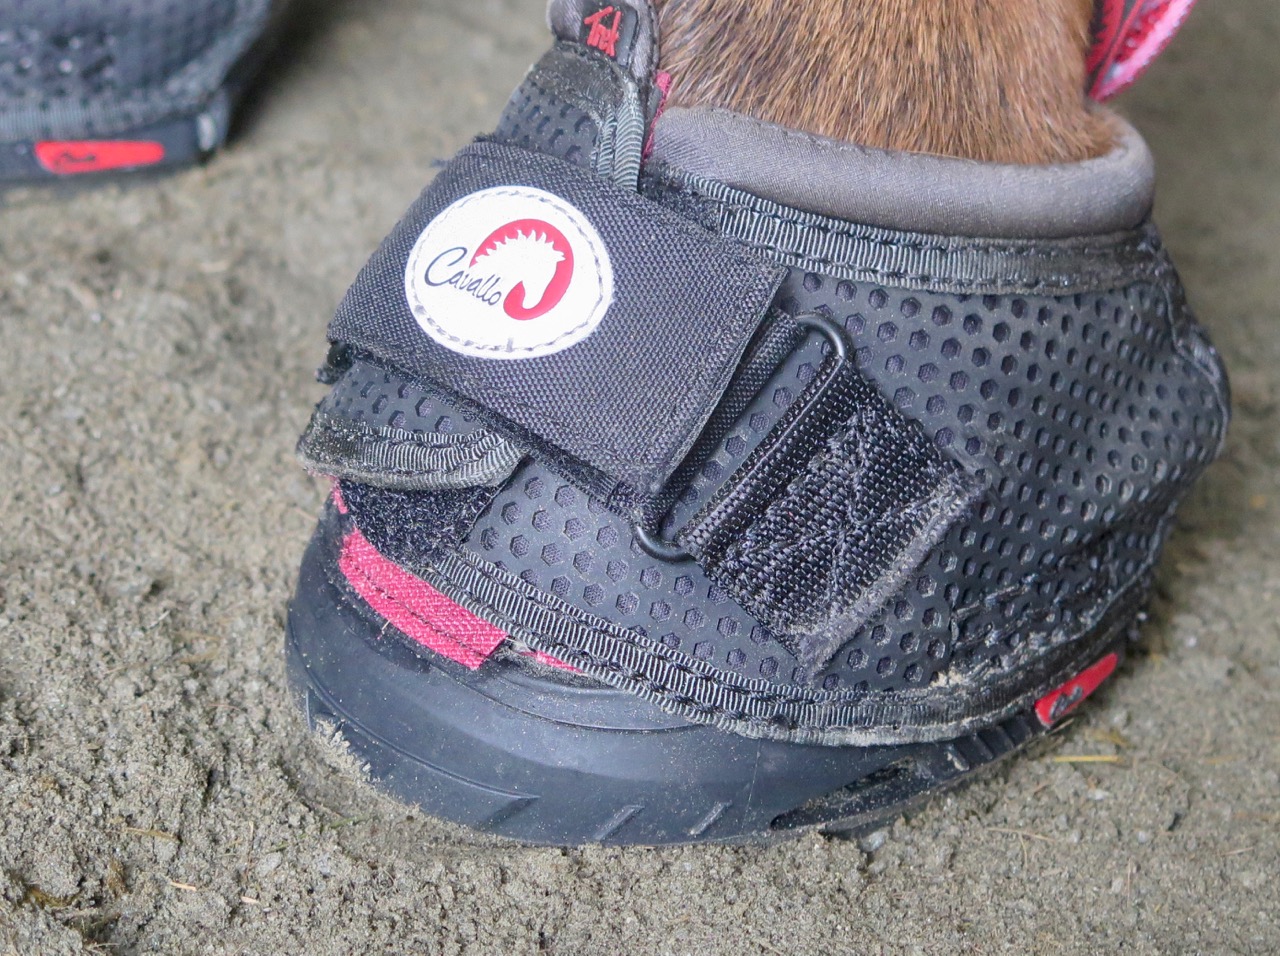 Cavallo Hoof Boot Review: First Impression